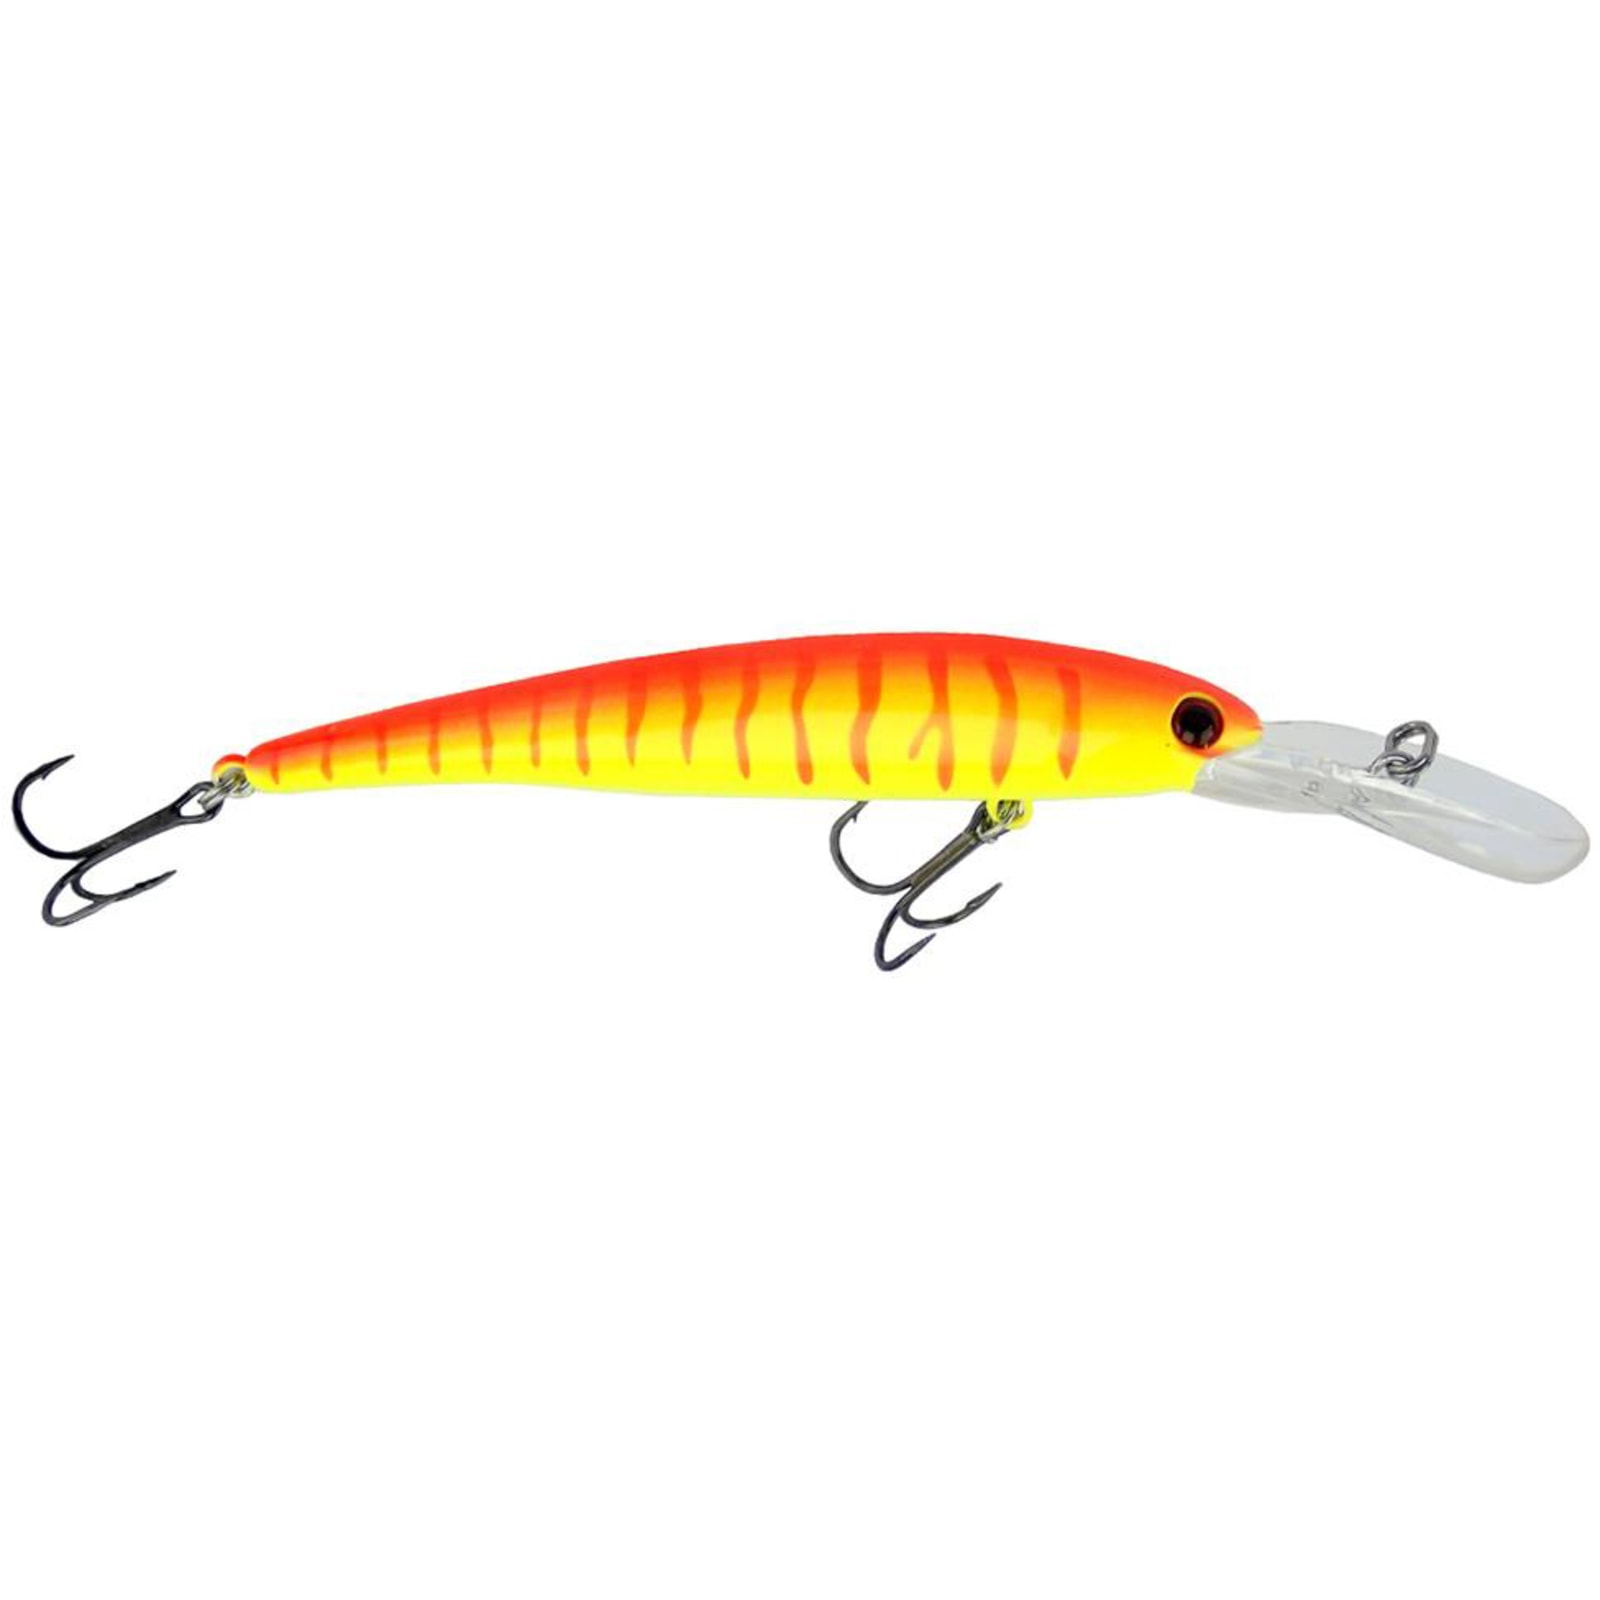 B-Shad Crankbait - Red Fire Tiger by Bandit Lures at Fleet Farm